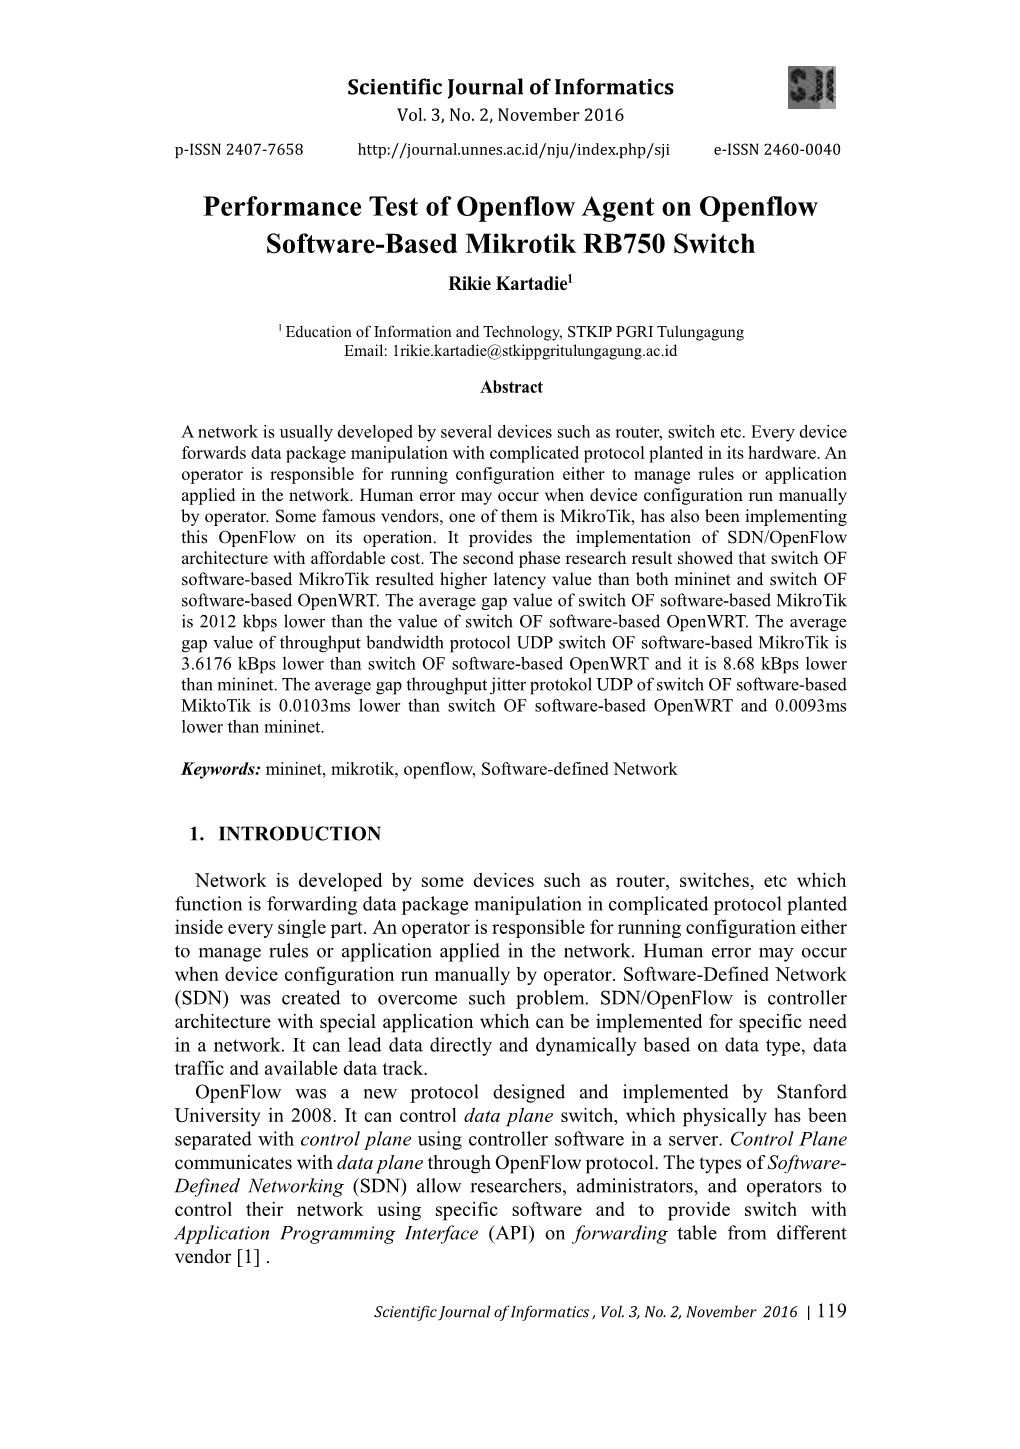 Performance Test of Openflow Agent on Openflow Software-Based Mikrotik RB750 Switch Rikie Kartadie1